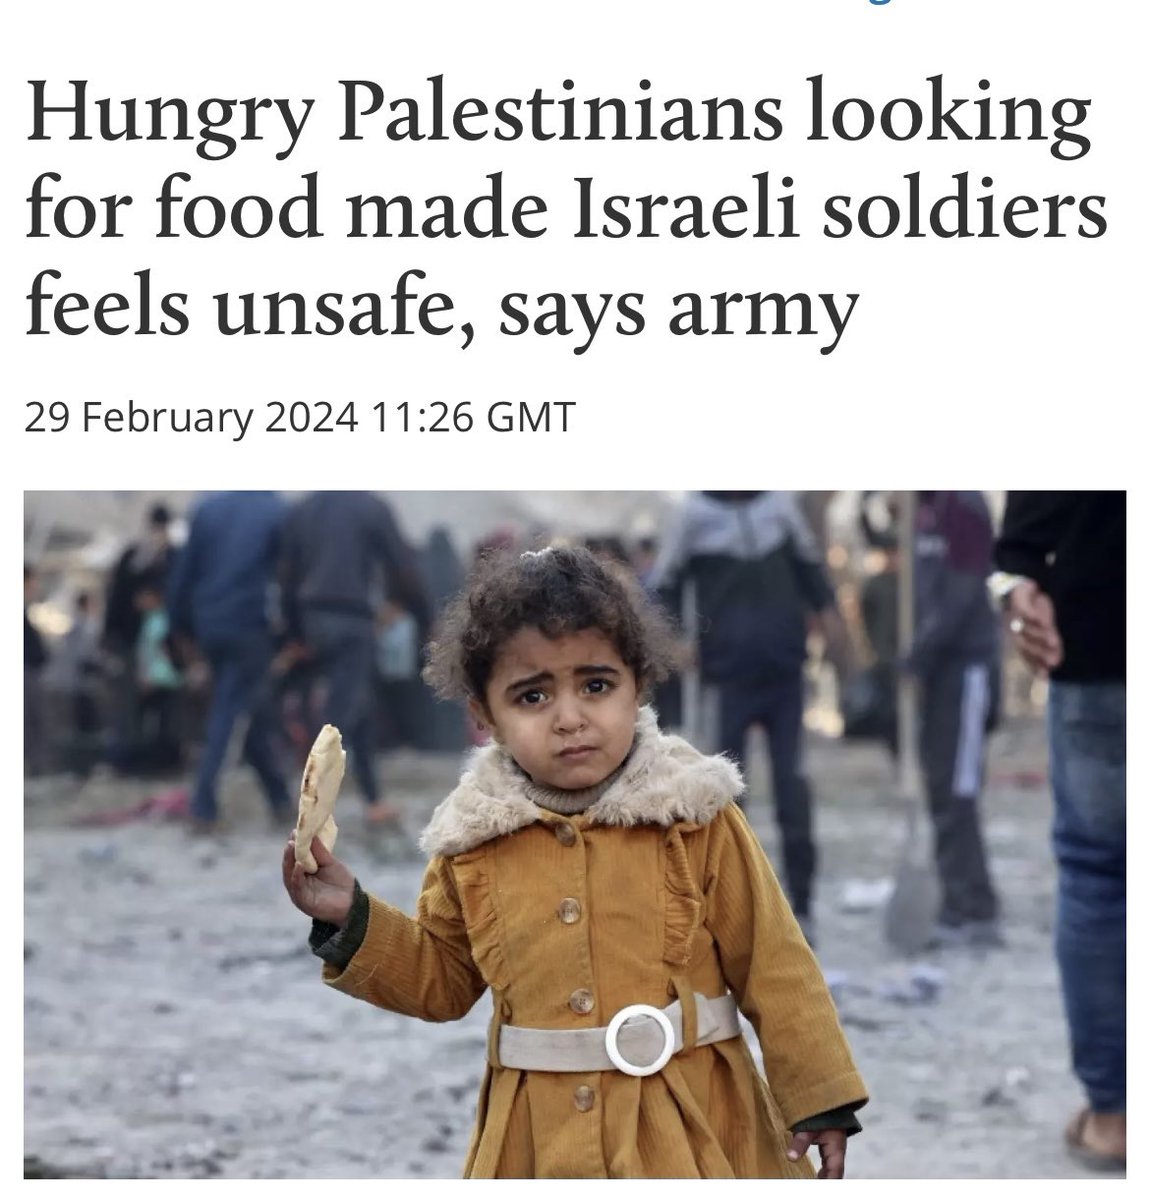 This is a real news headline Thousand of hunger Palestines where waiting to get food when the IDF opened fire killing over 100 people Even when they are slaughtering innocent civilians they play the victim